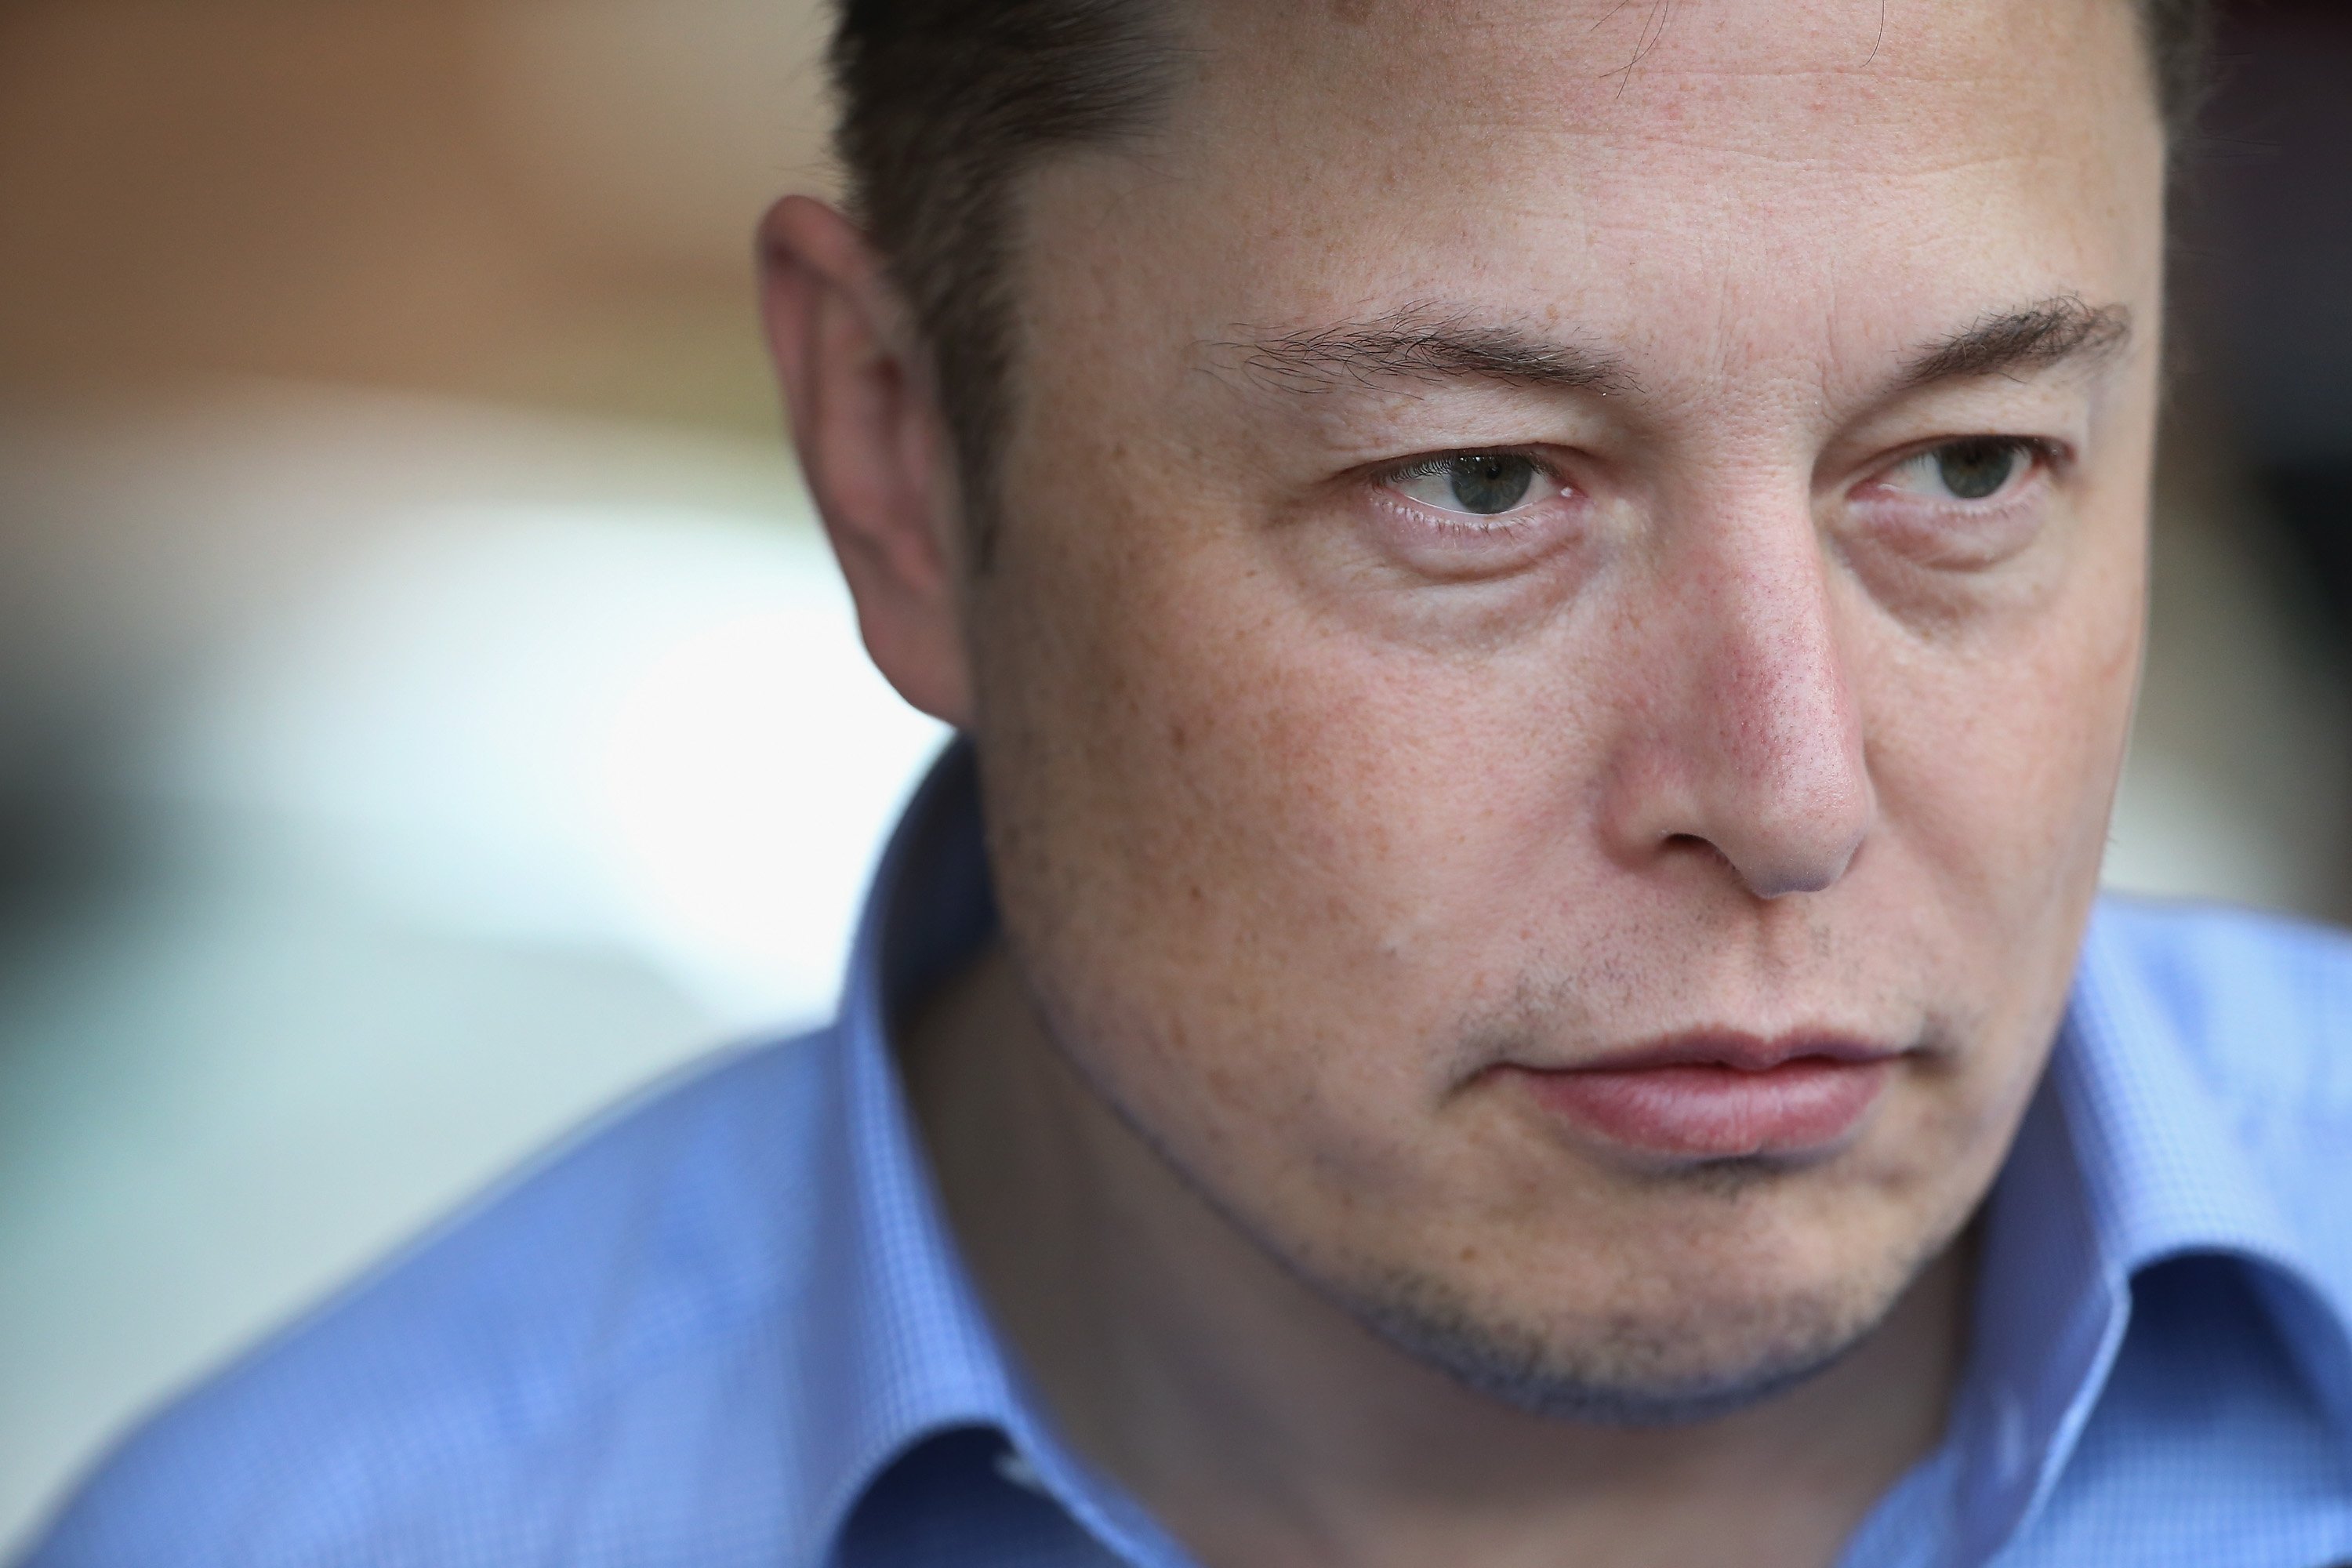 Elon Musk at the Allen & Company Sun Valley Conference on July 7, 2015 in Idaho. | Source: Getty Images